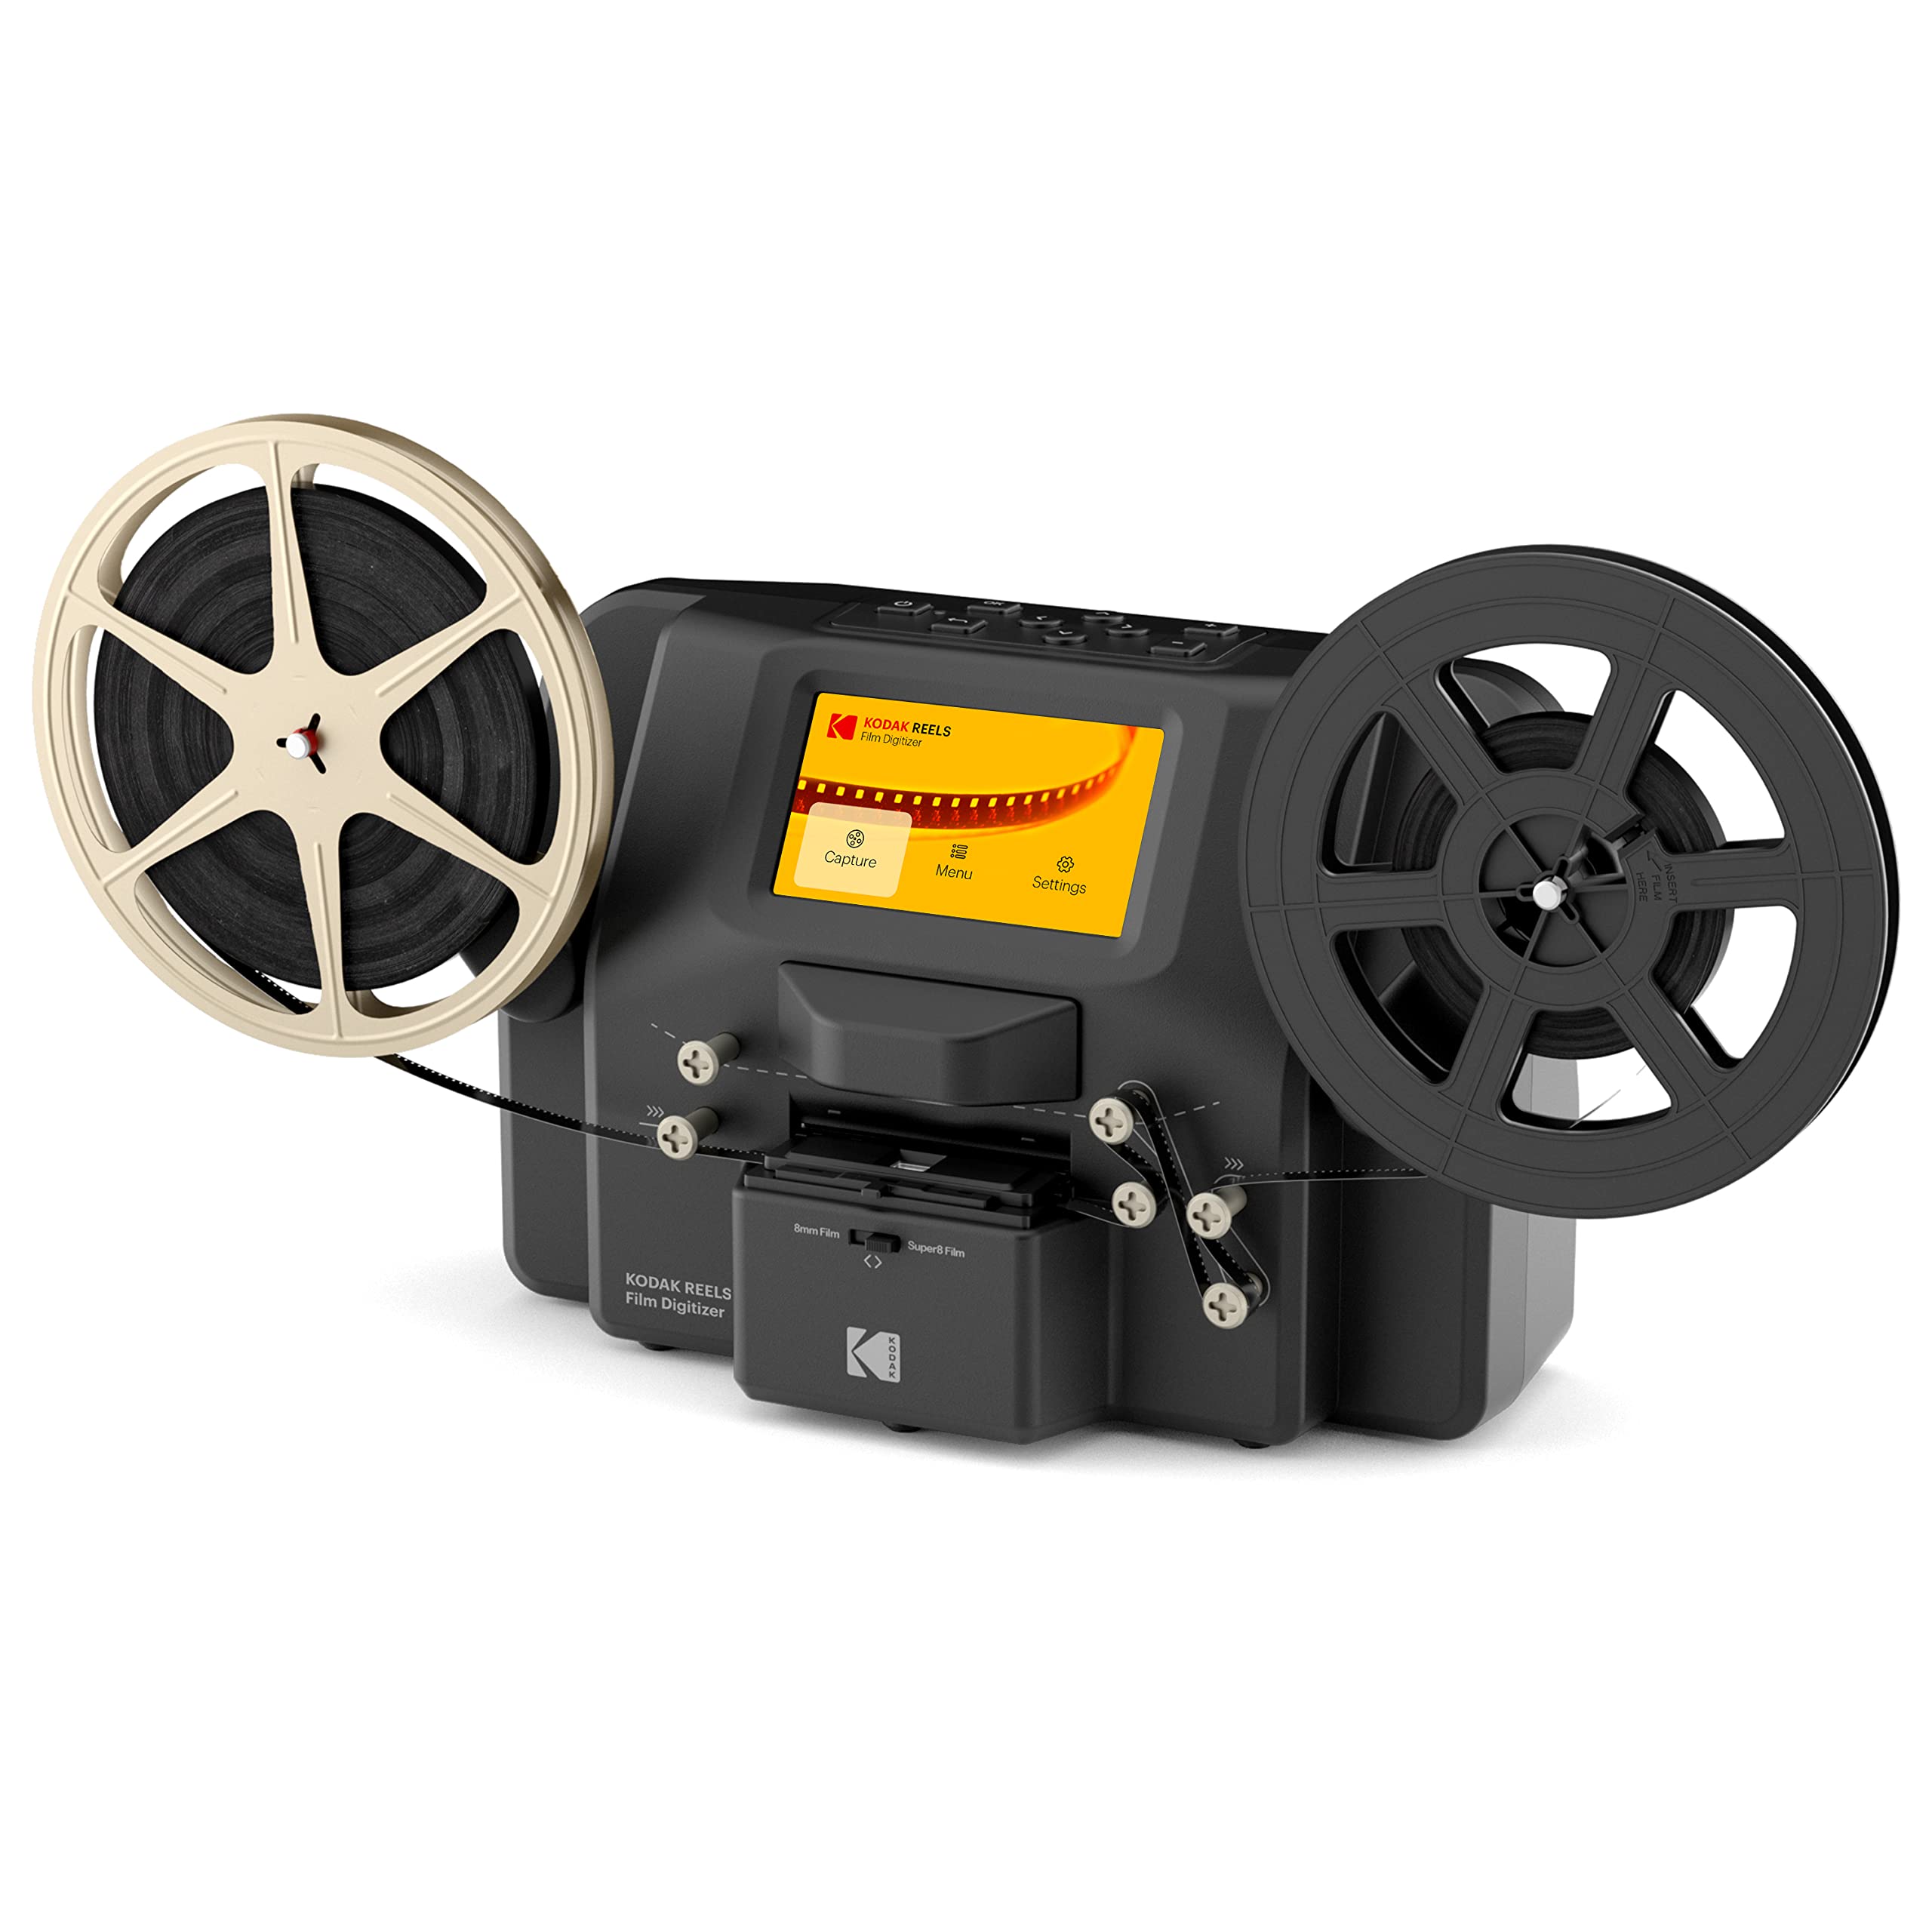  Kodak REELS 8mm & Super 8 Films Digitizer Converter with Big 5” Screen, Scanner Converts Film Frame by Frame to Digital MP4 Files for Viewing, Sharing & Saving on SD Card for 3” 4” 5” 7” and...